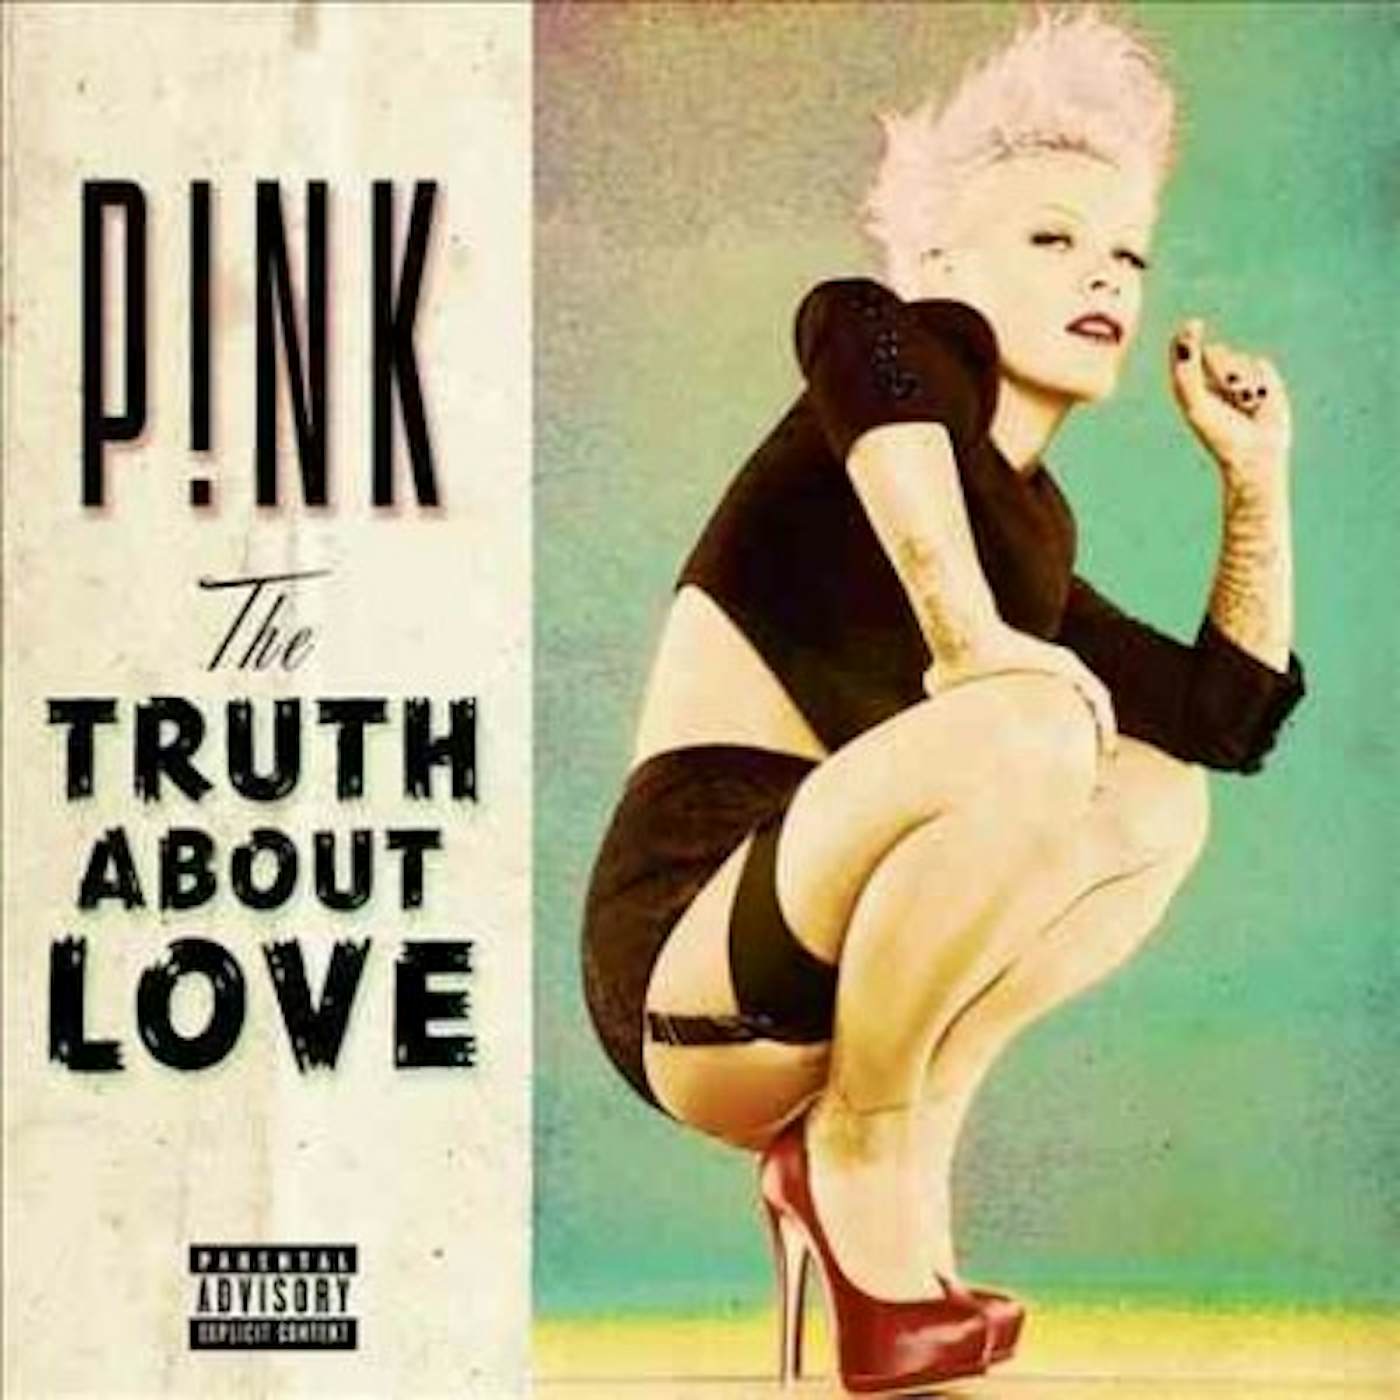 P!nk TRUTH ABOUT LOVE Vinyl Record